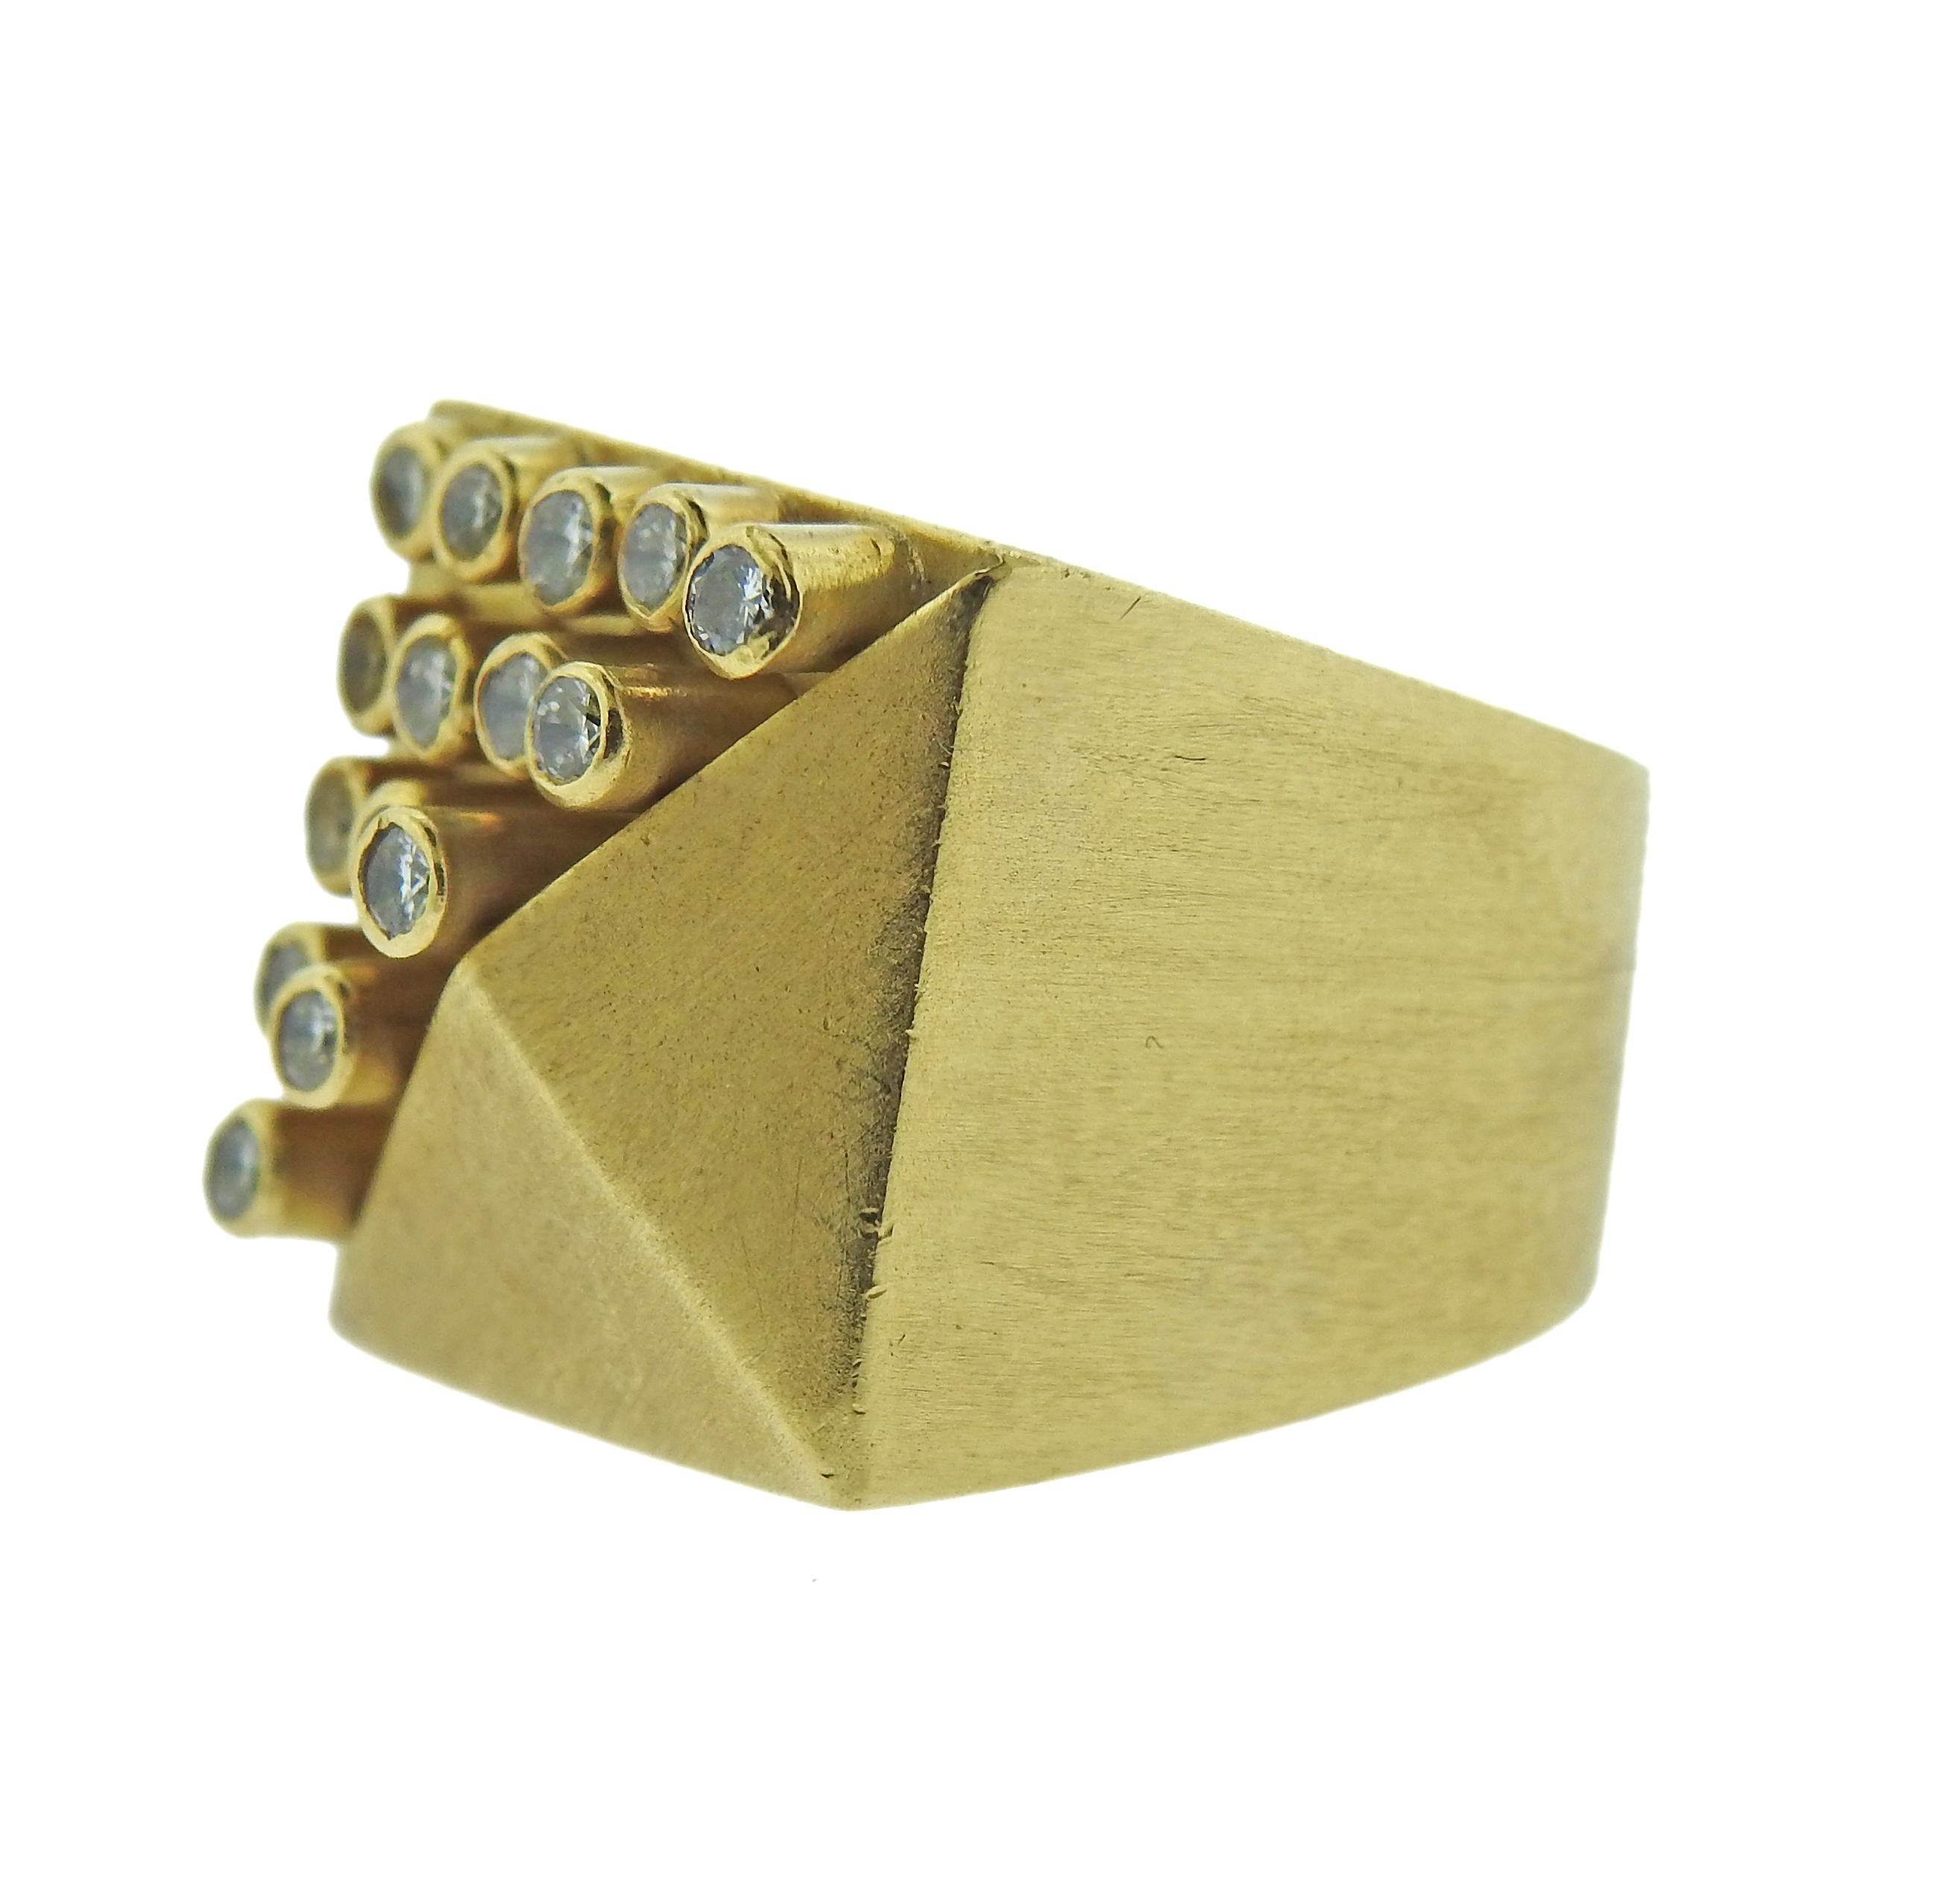 18k gold geometric Modernist ring by Vancox, with approx. 0.45ctw in diamonds. Ring size - 5.25, ring top - 18mm x 18mm. Marked: 750, Vancox,  Maker's mark, K. Weight - 15.3 grams.